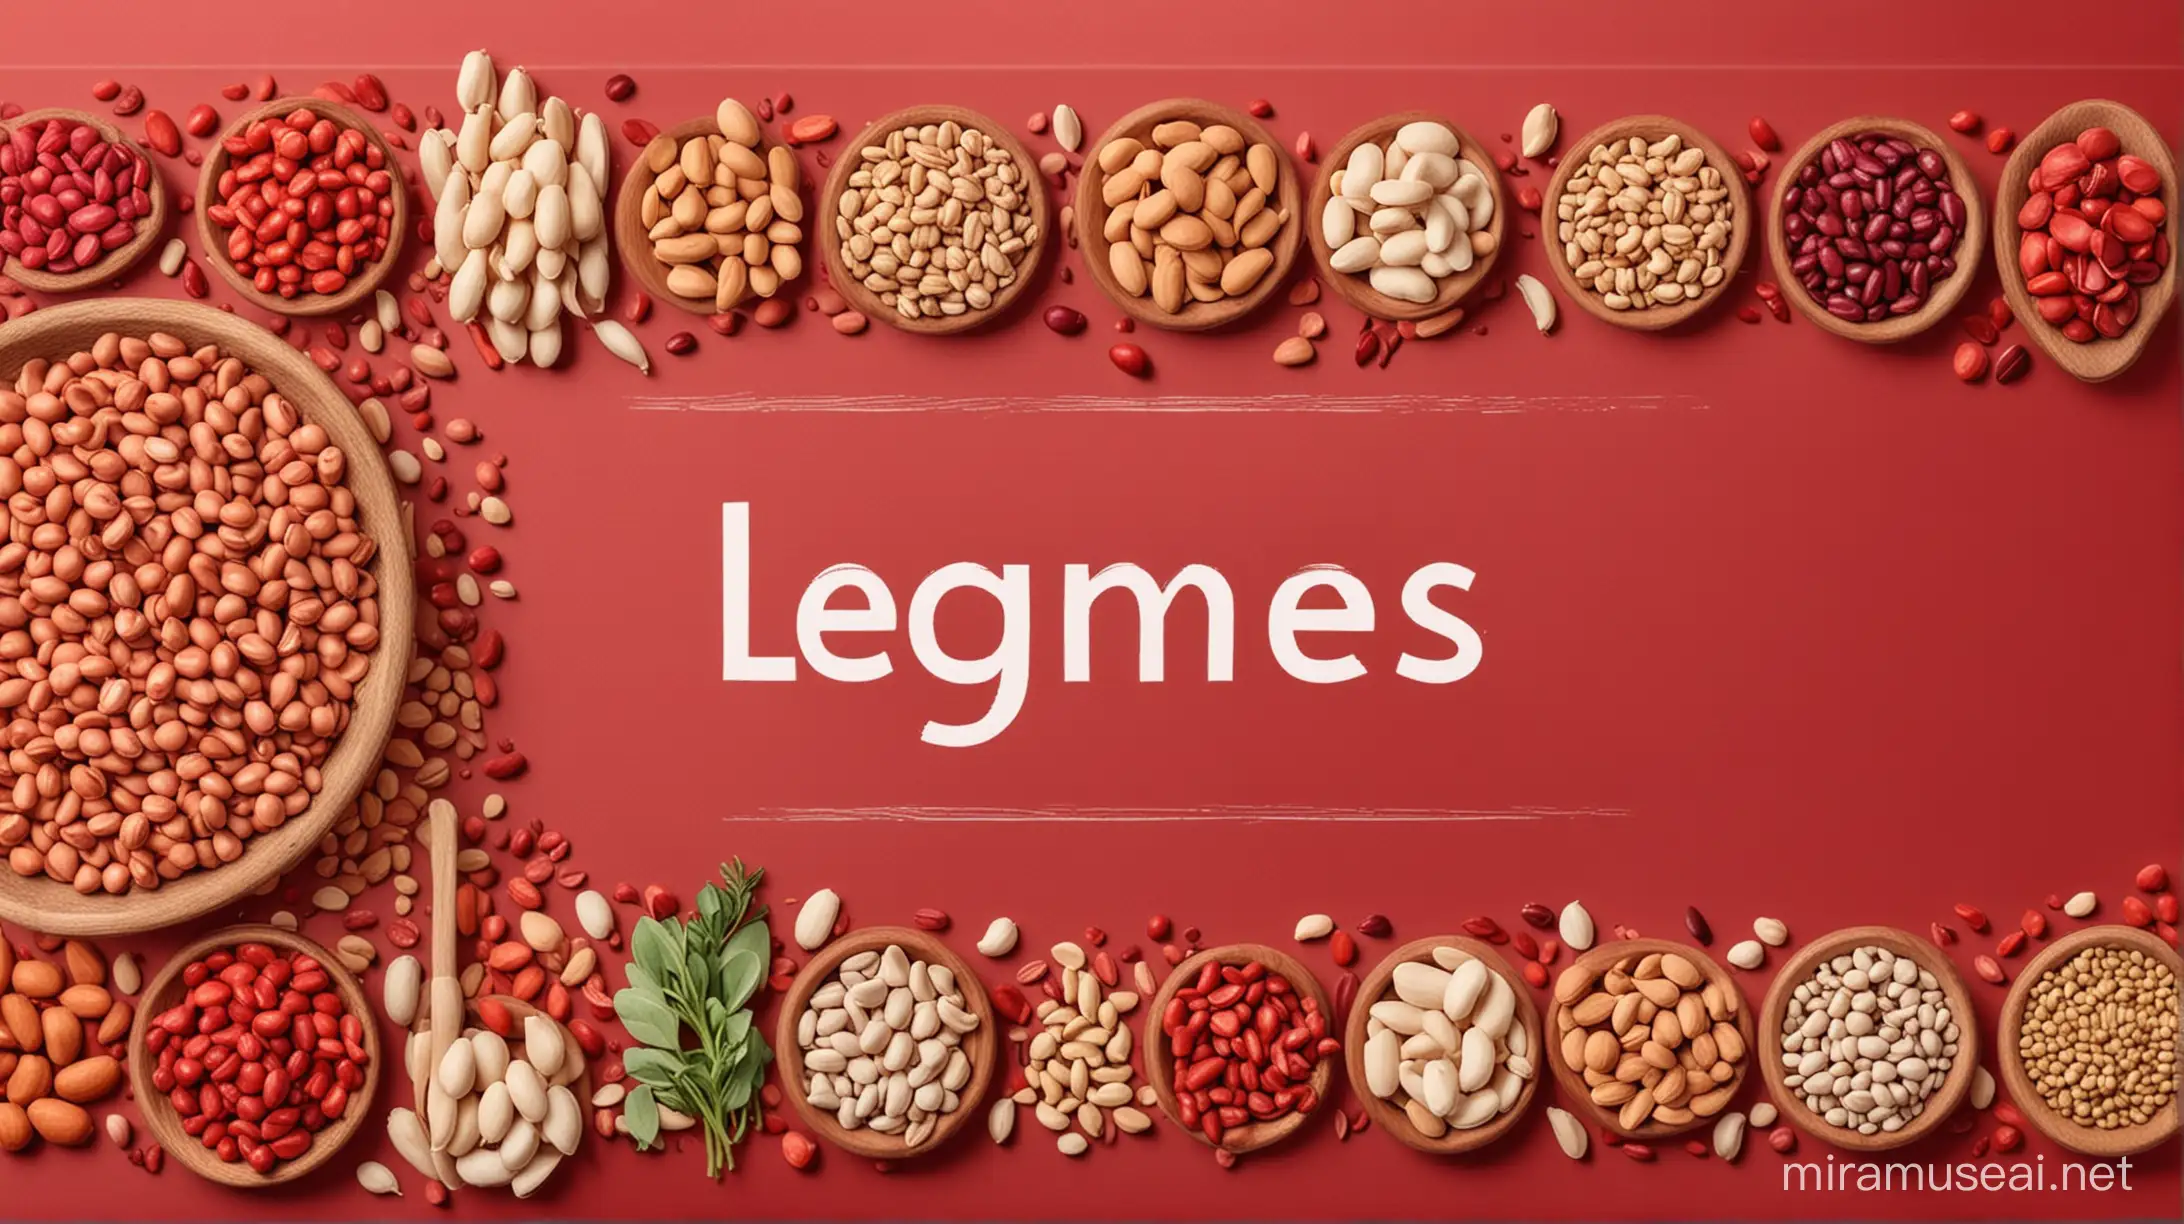 Banner design with red color palette about legumes